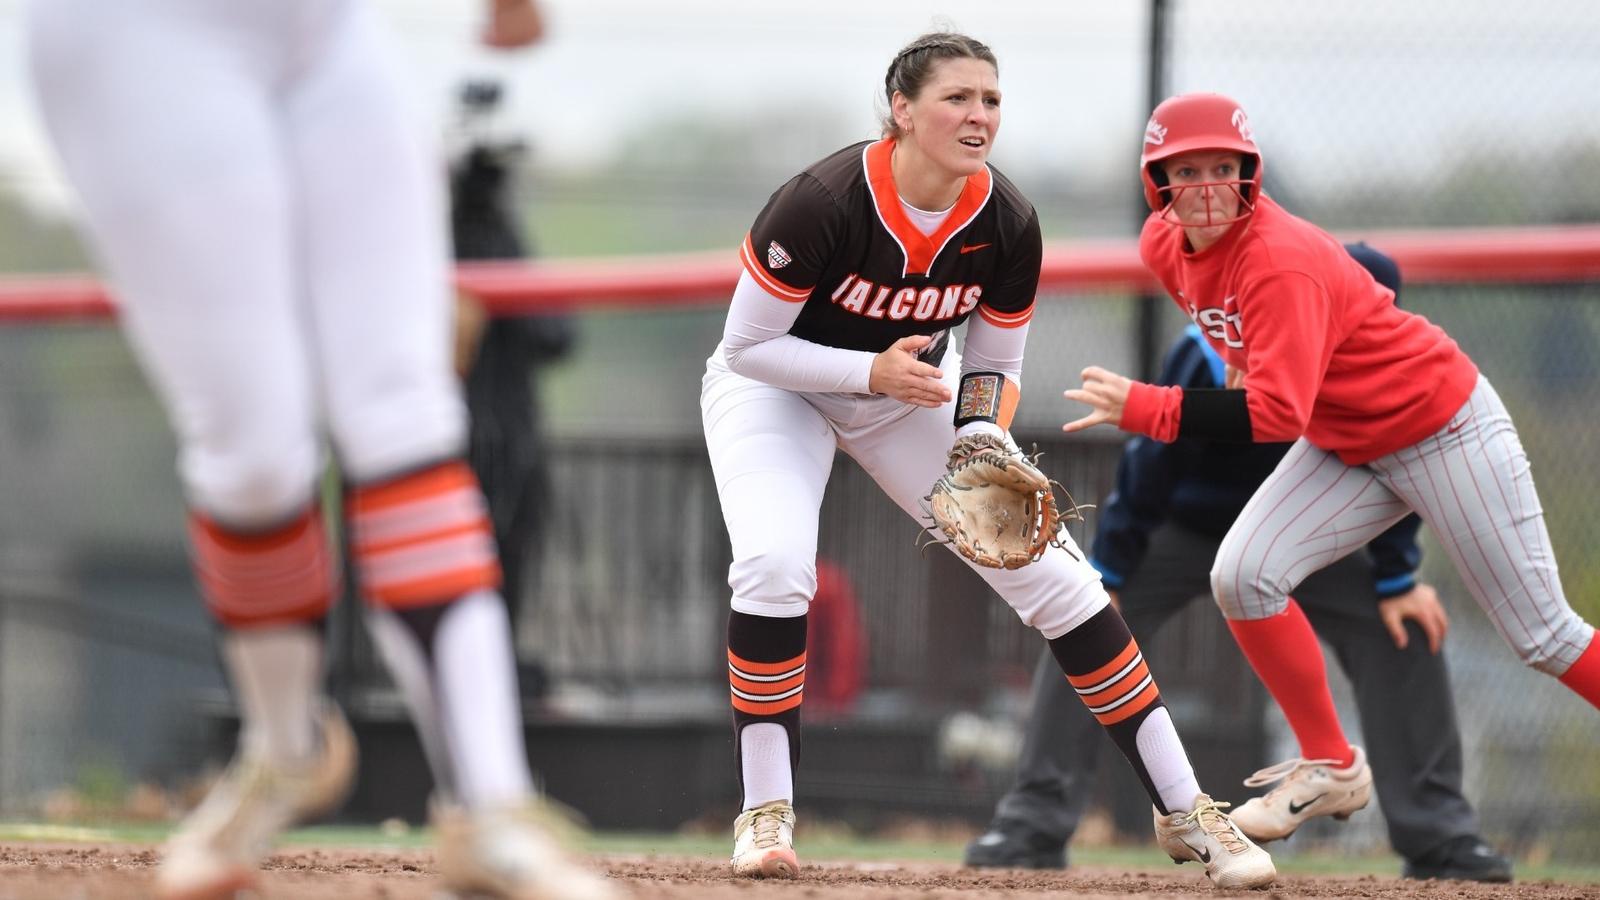 Youngstown State University Secures Double Victory Against Bowling Green State University Softball Team